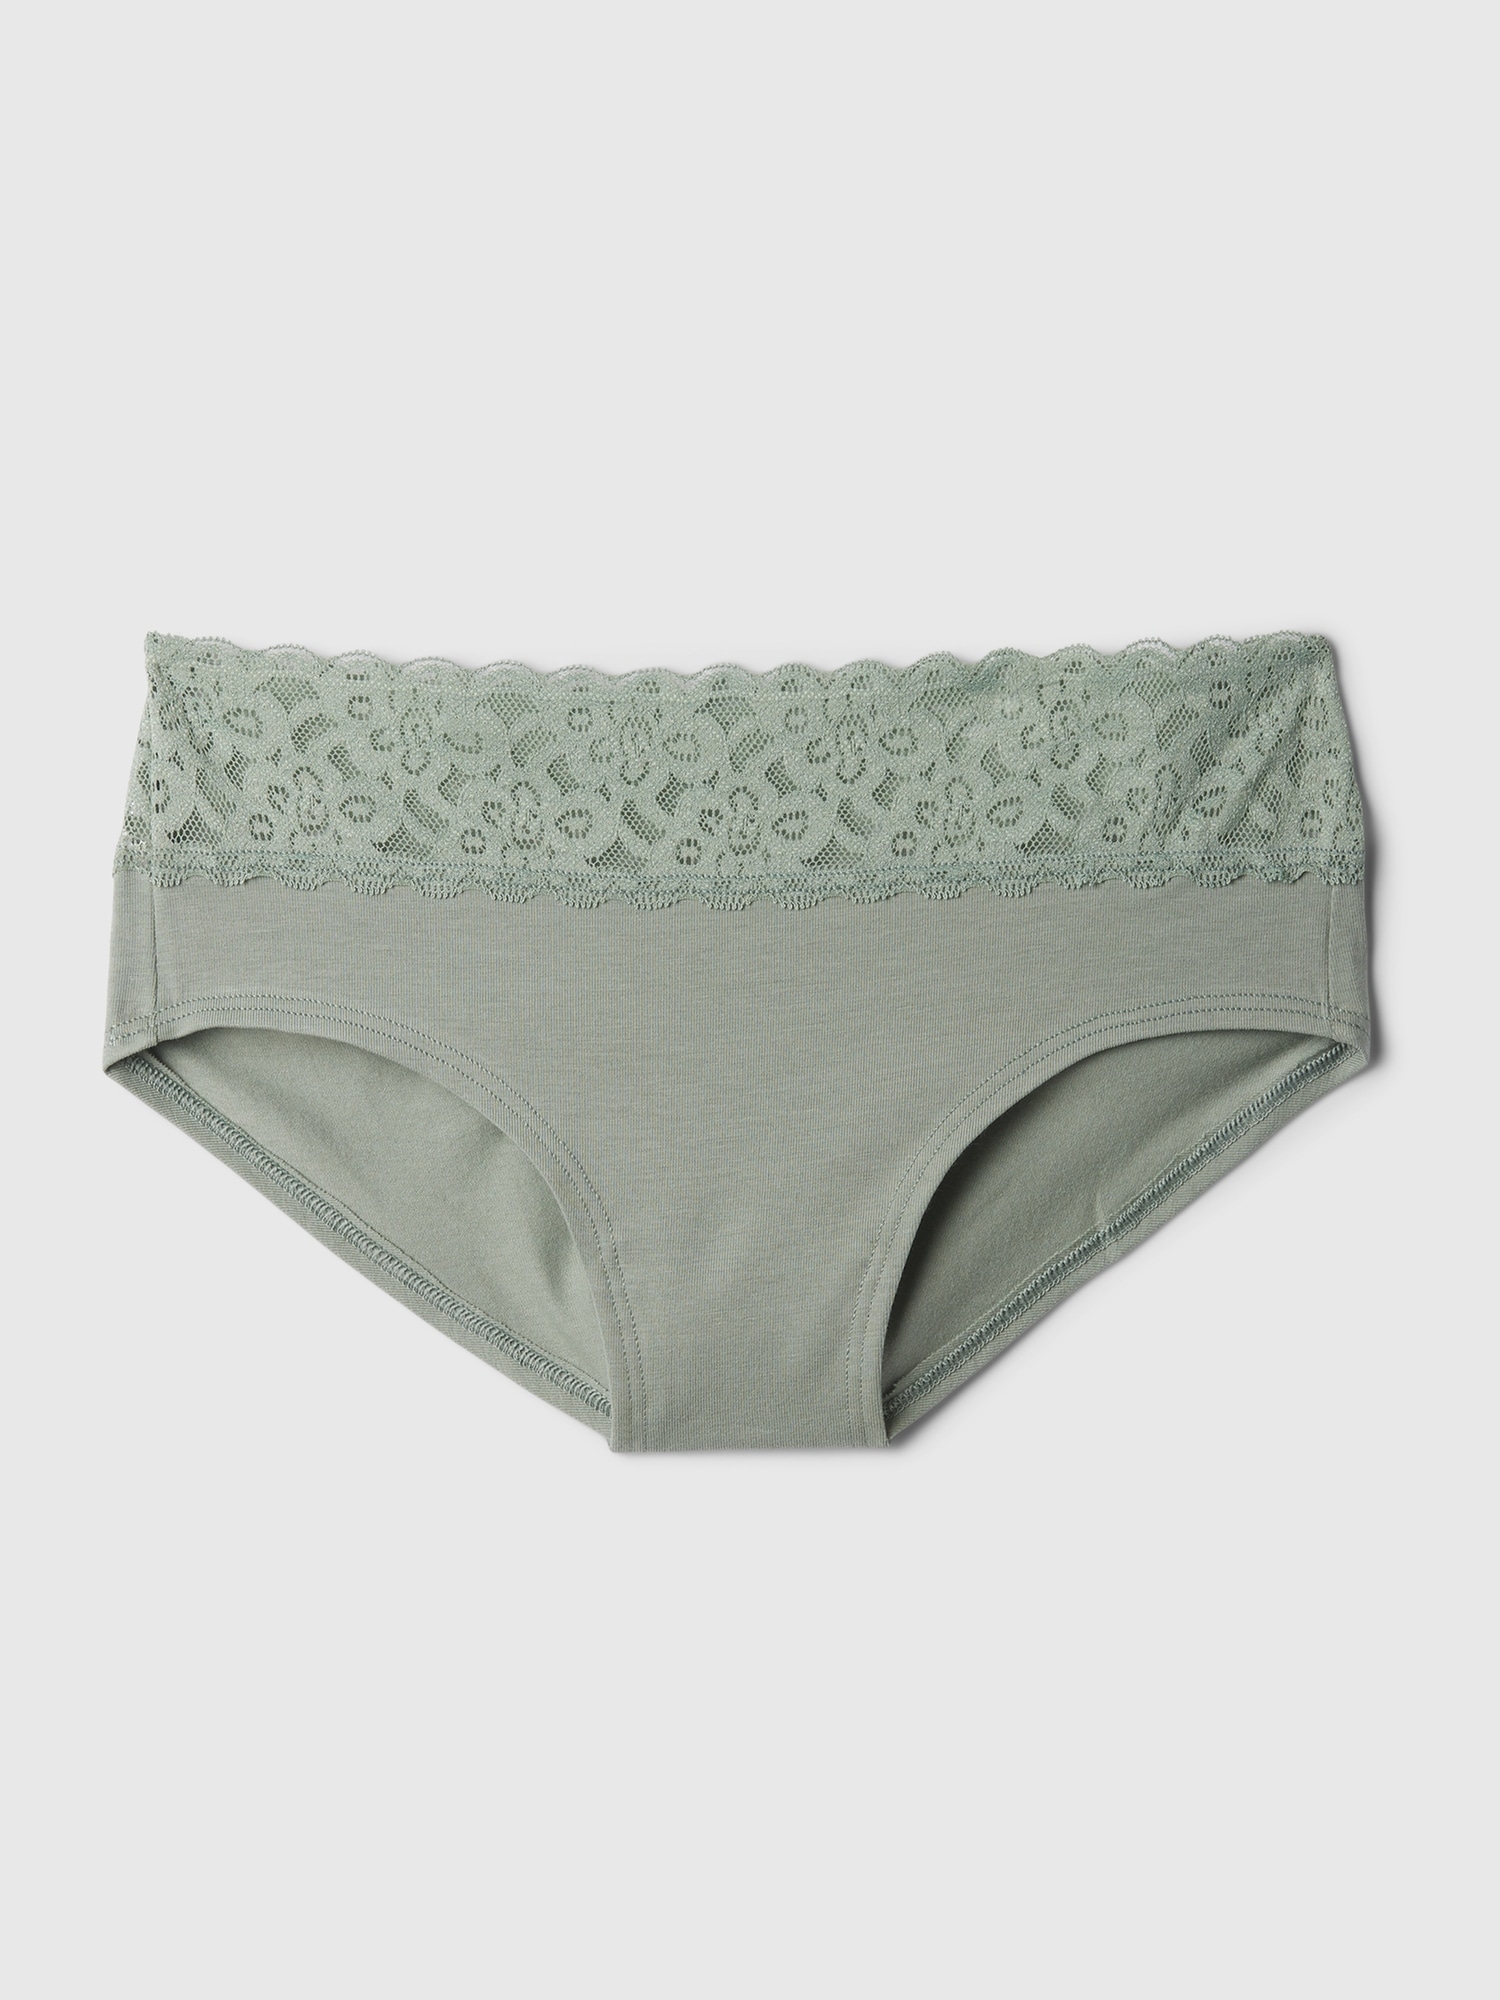 Buy Sage Green Lace Detail High Leg Knickers 6, Knickers